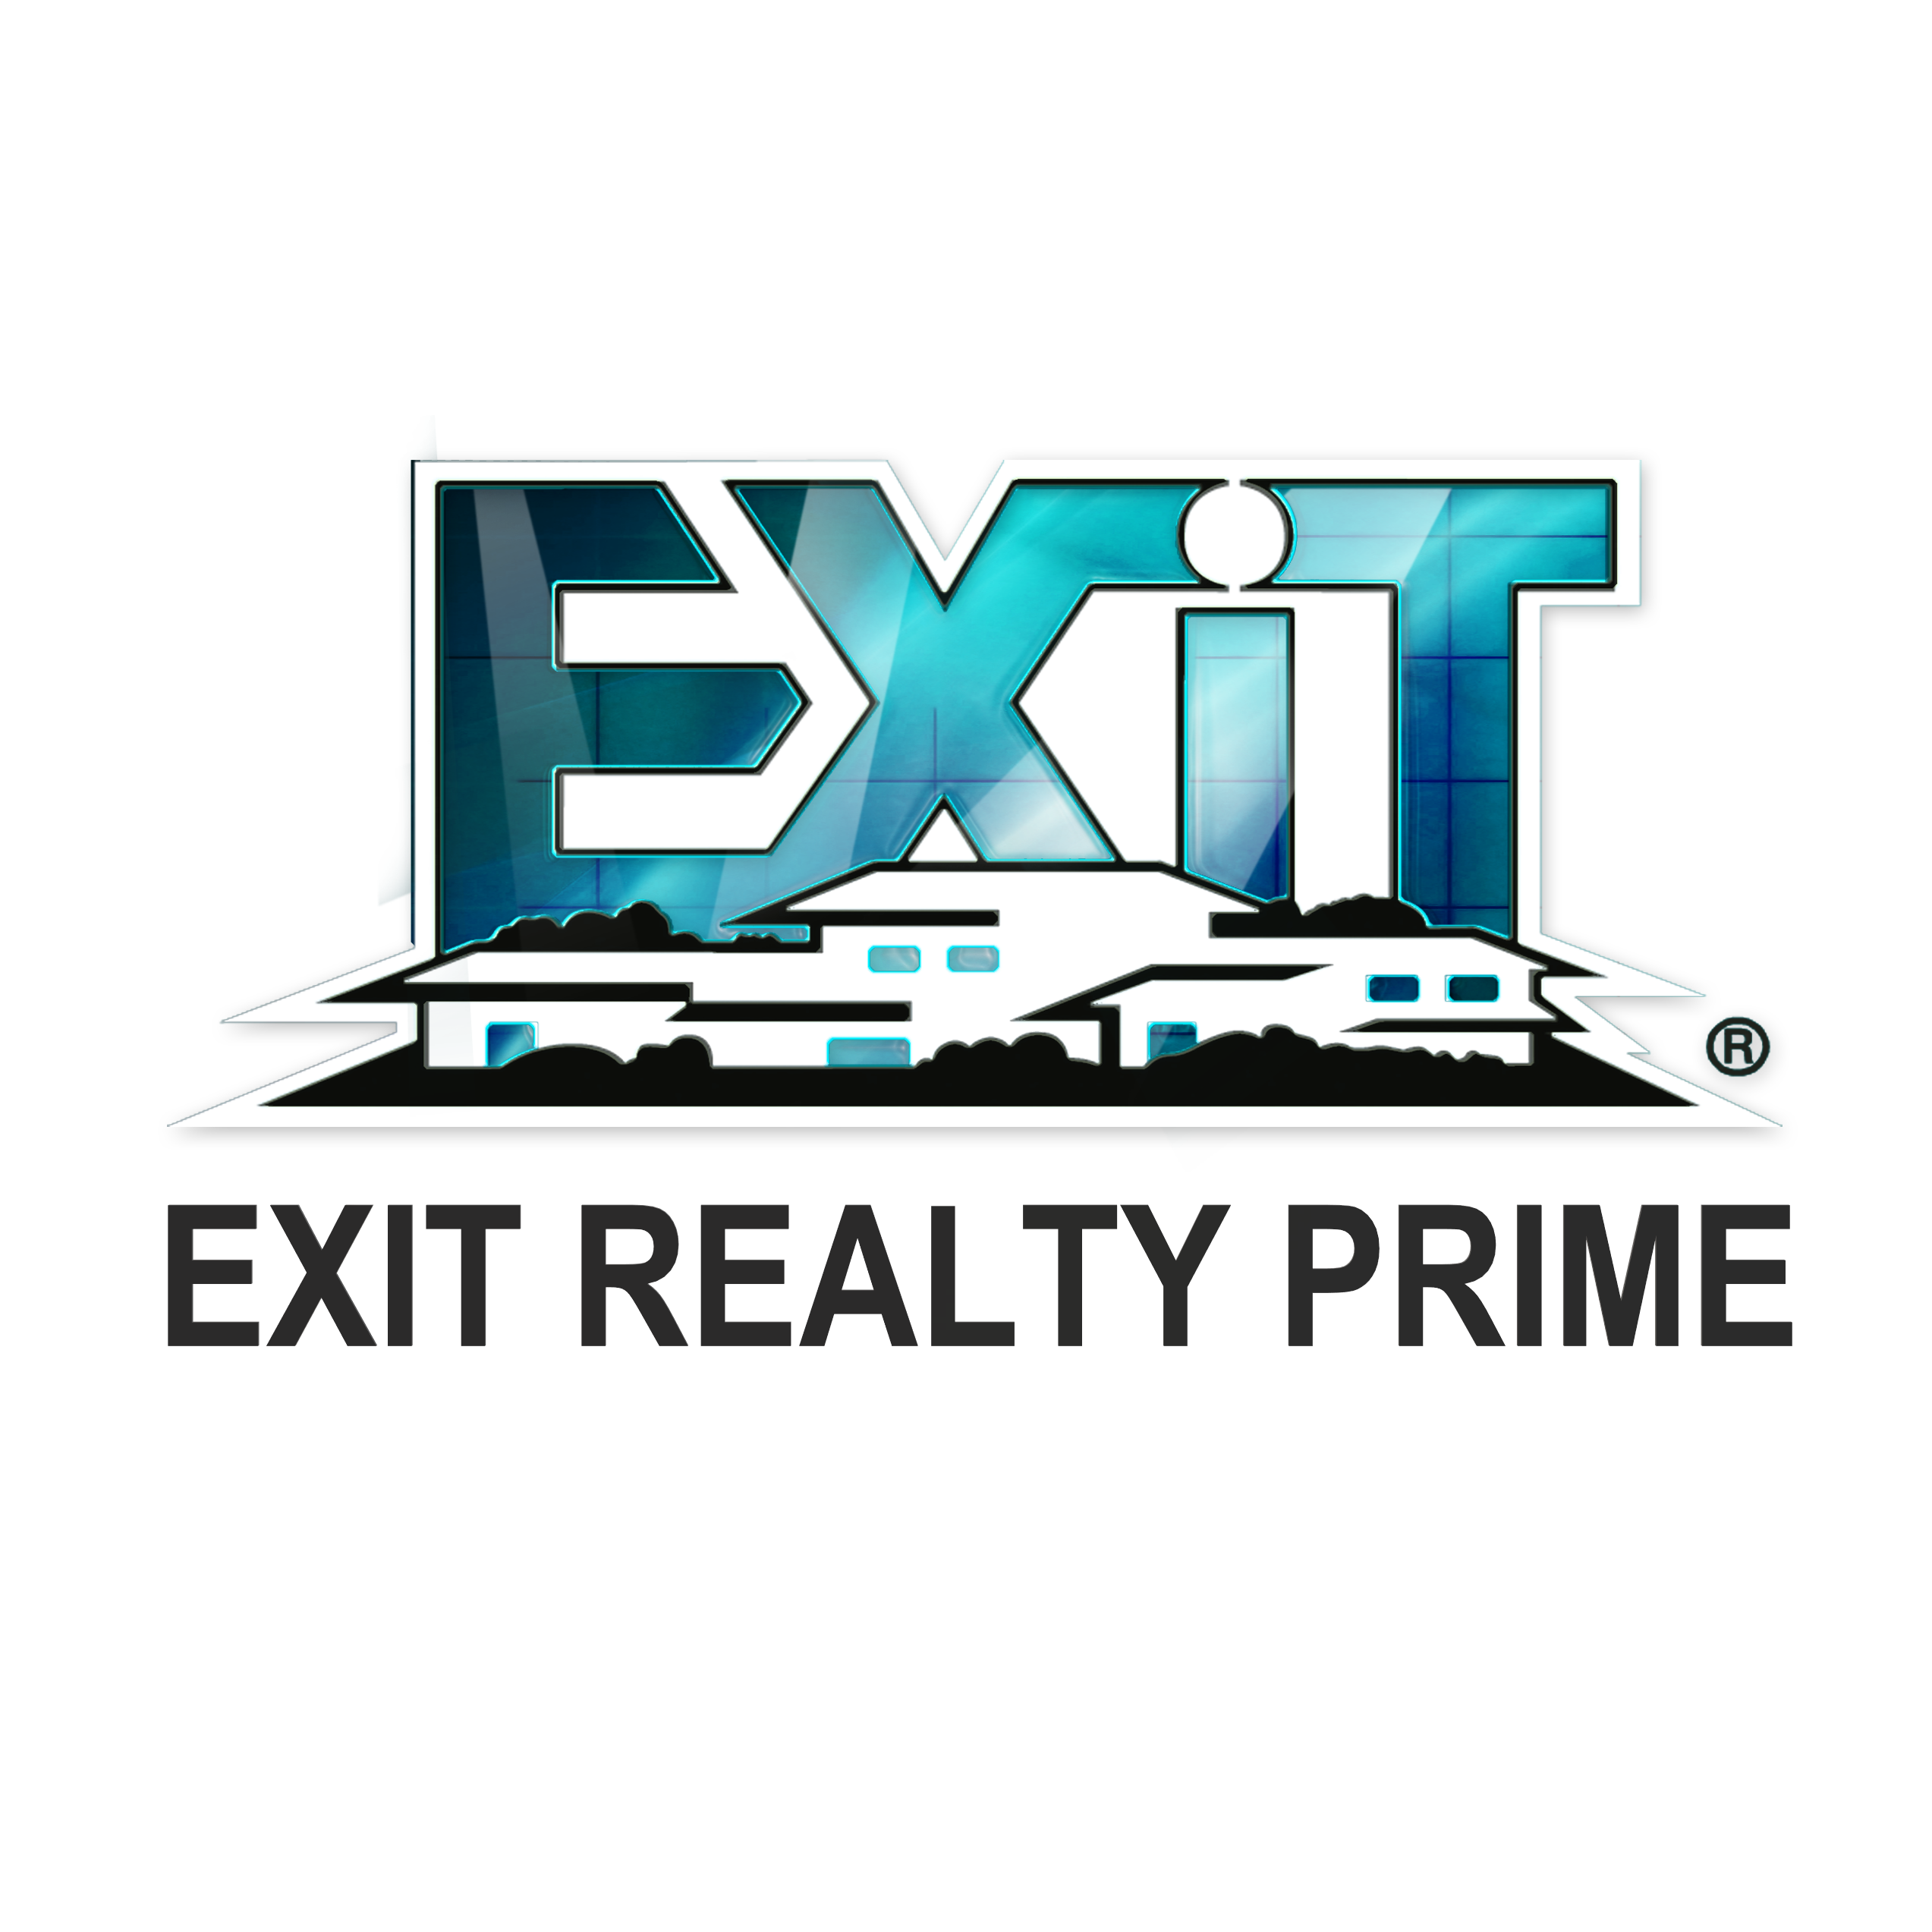 EXIT realty prime